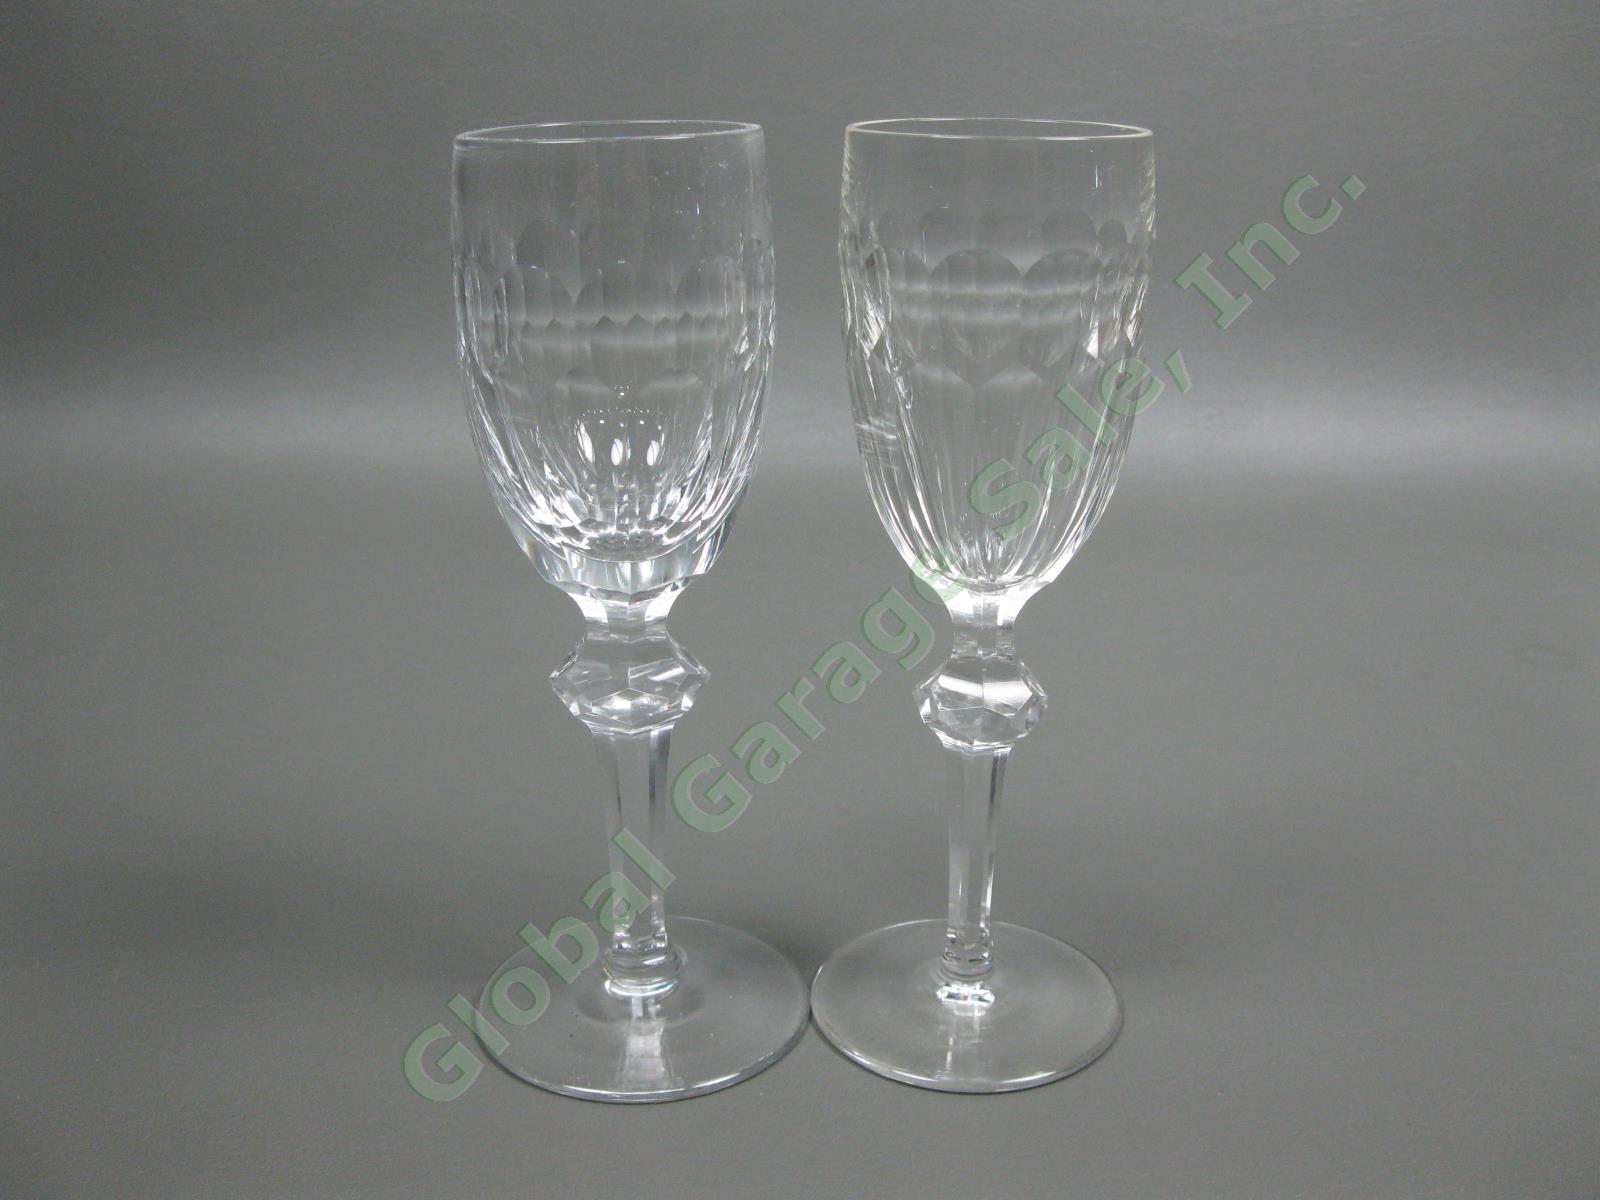 4 Waterford Crystal Curraghmore Sherry Wine Glasses Ireland Blown Cut Glass Set 7